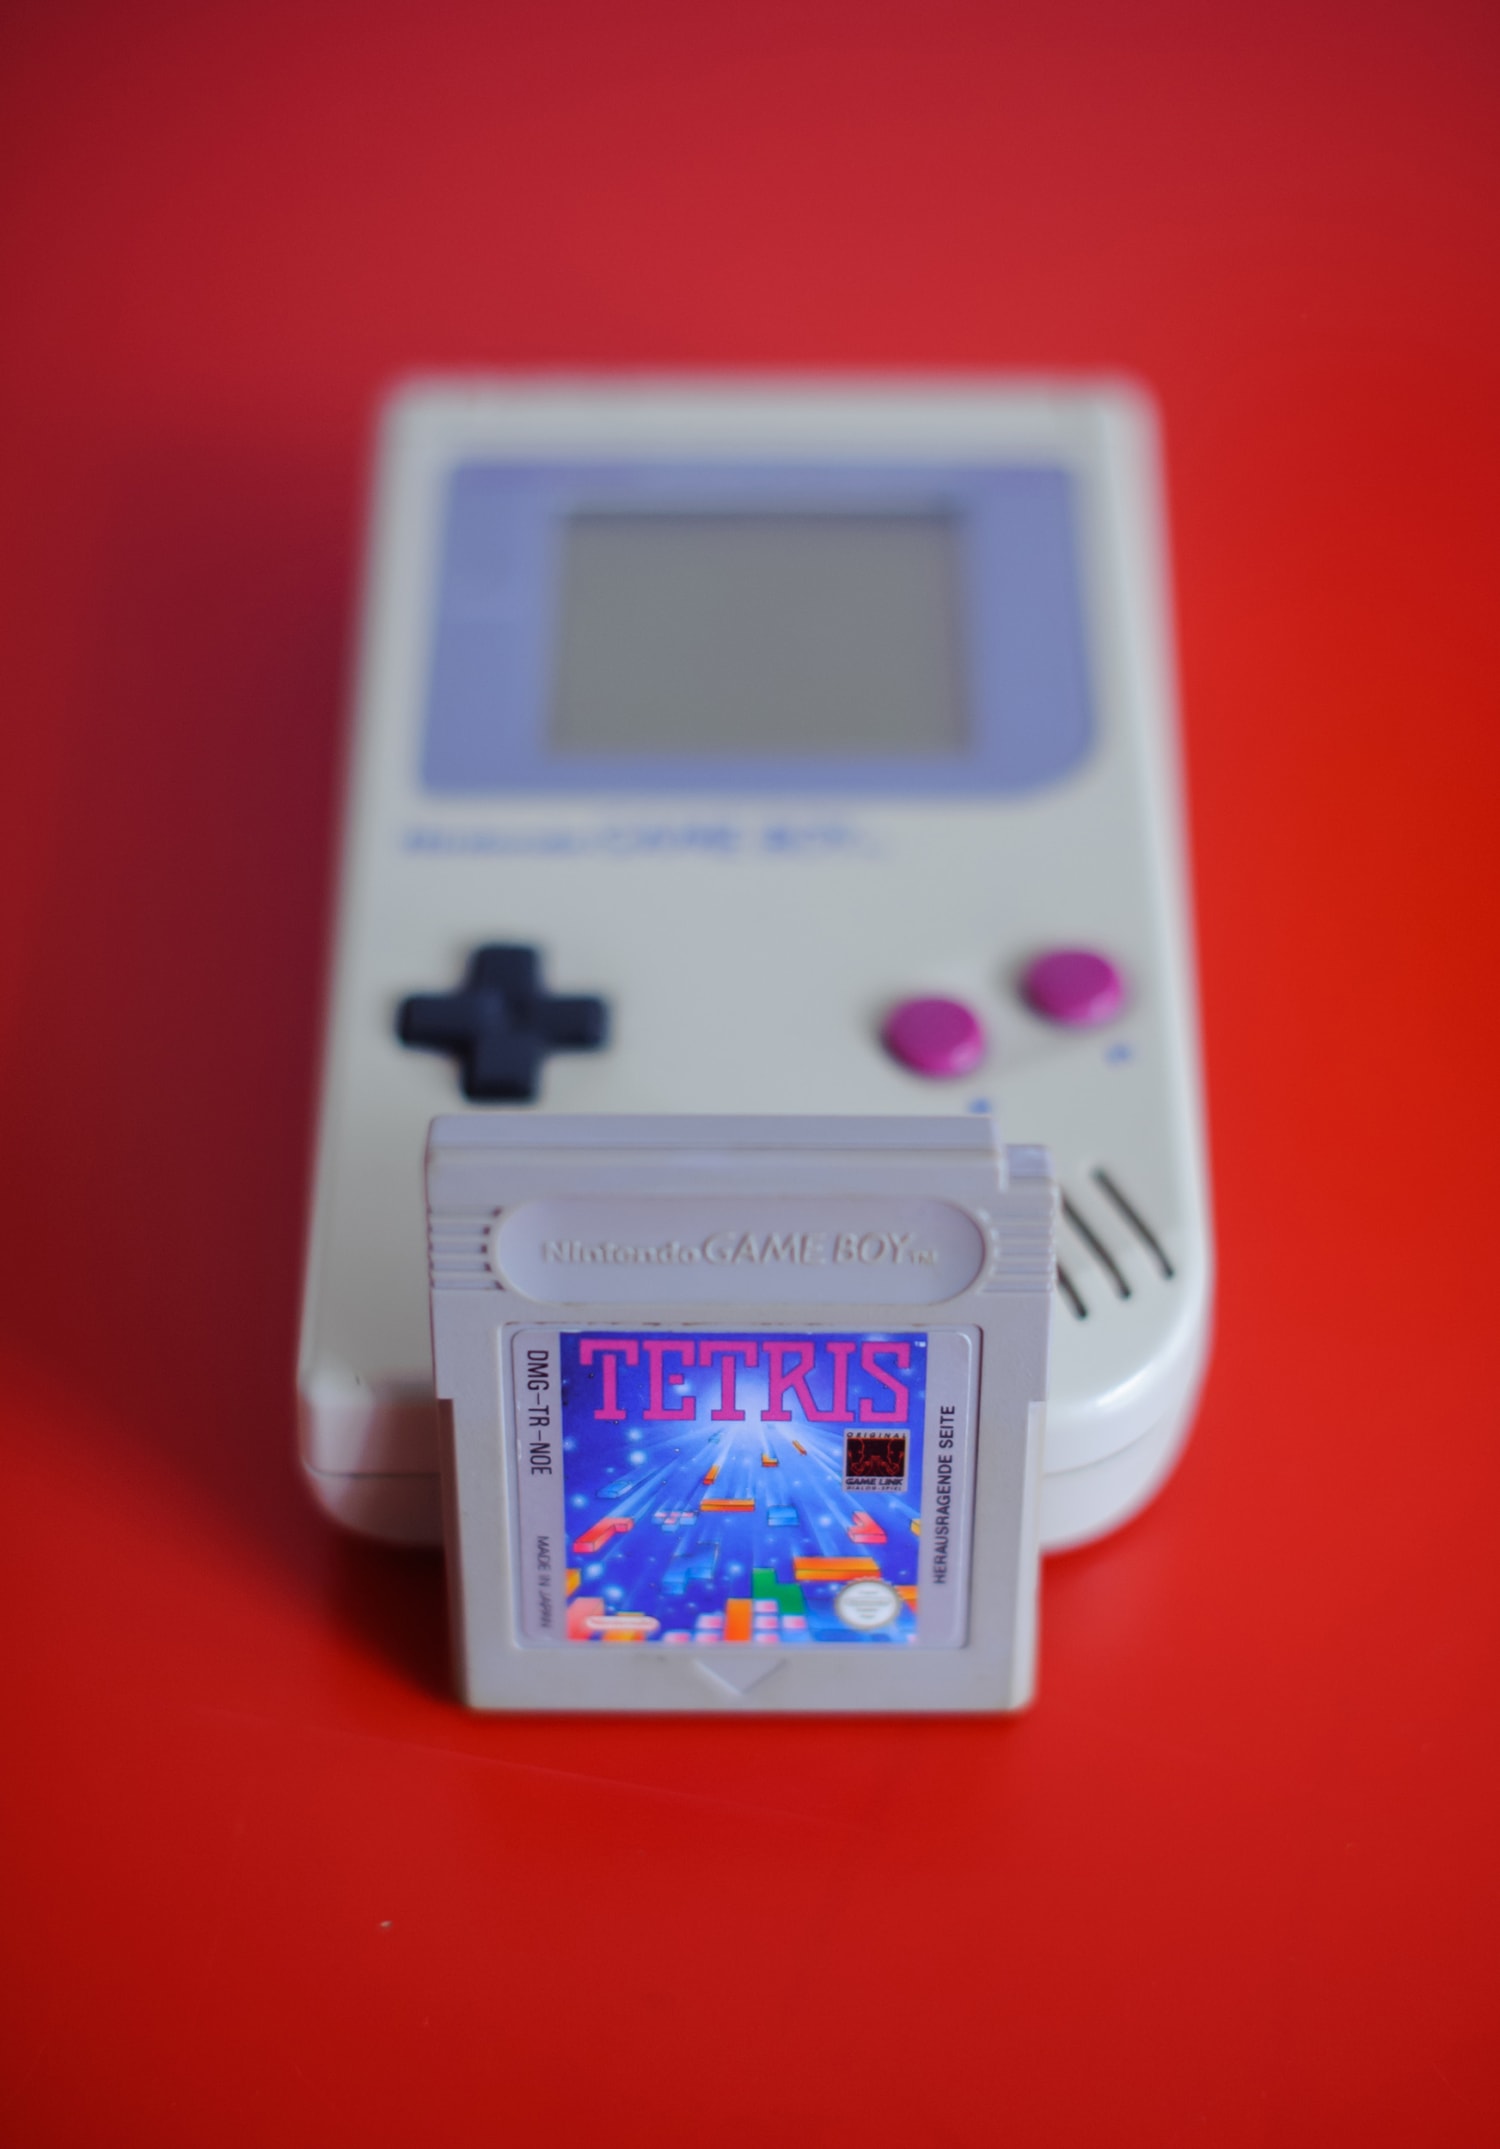 Why Game Boy 'Tetris' were the perfect fit, according to game's creator